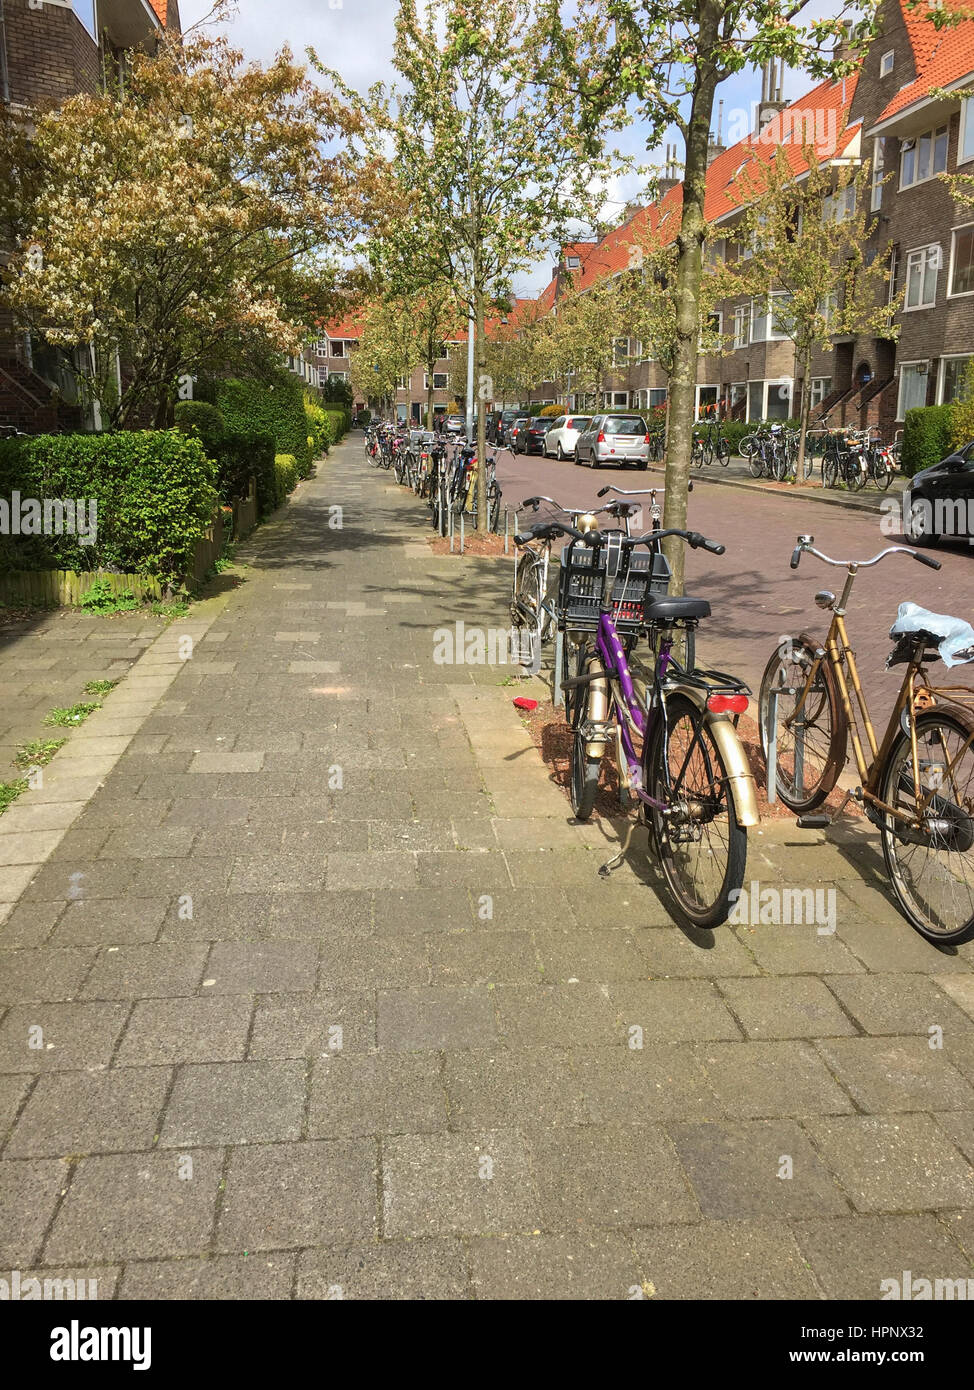 Many bikes parked on a residential street in the Netherlands Stock Photo